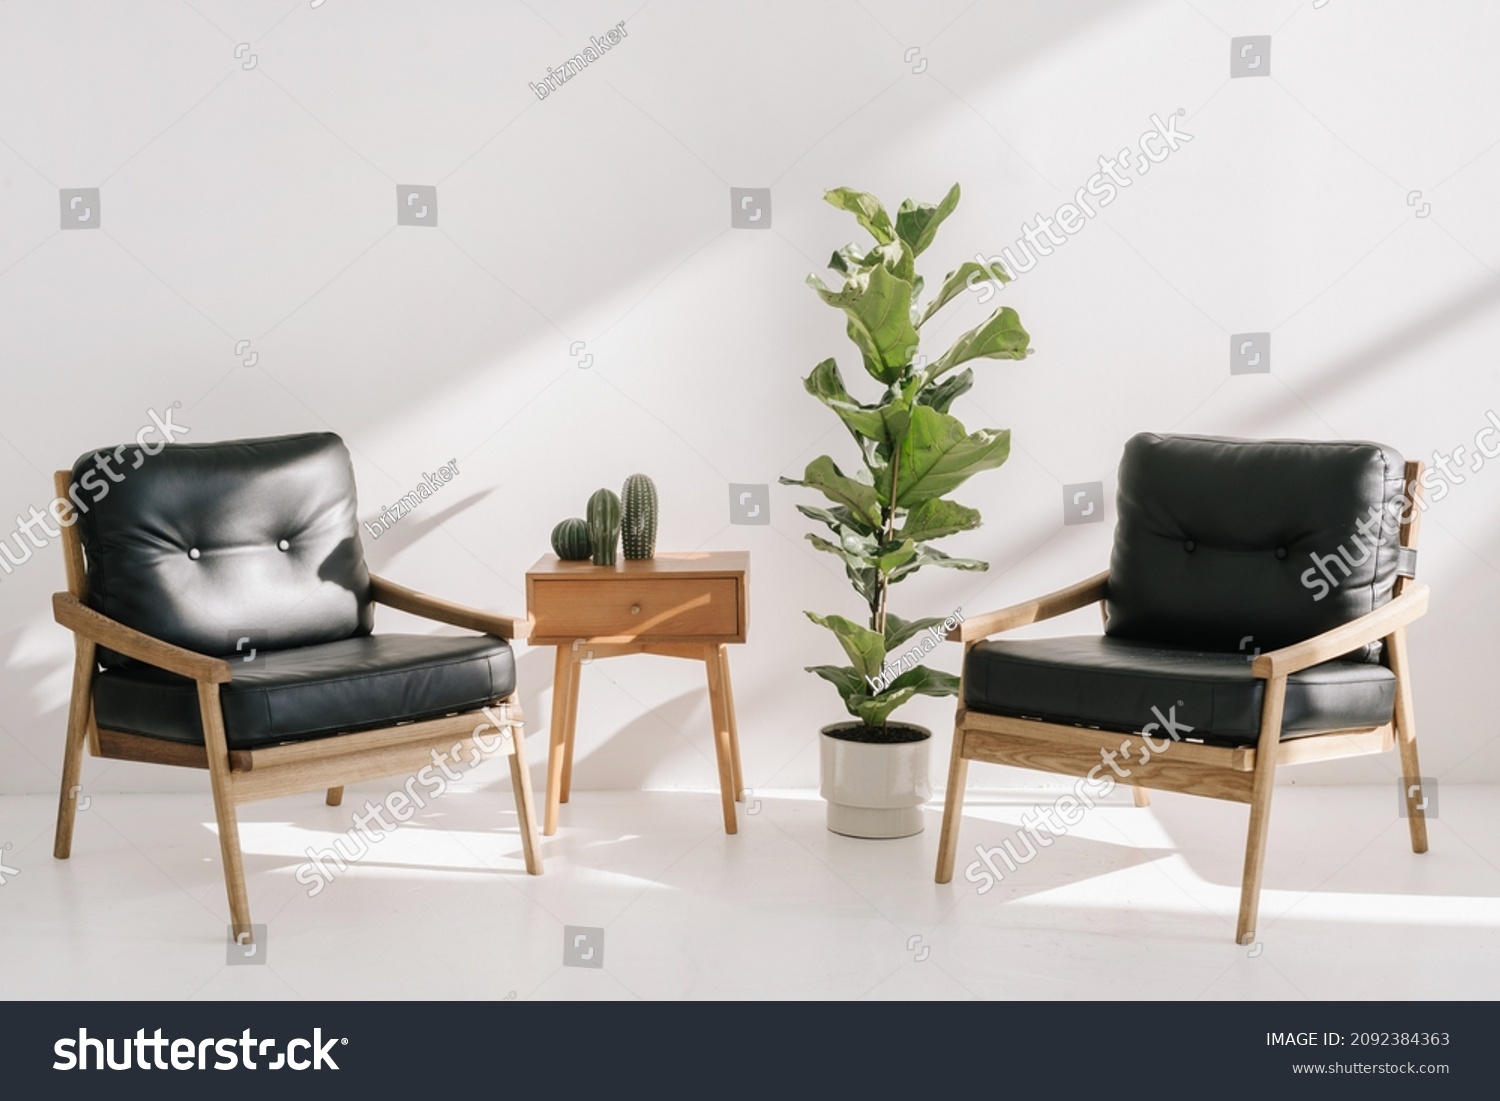 Home decor on side table with drawer standing near two leather armchairs and potted house plants. Recreation, relaxation concept. Wooden table and office chairs in bright copy space living room #2092384363